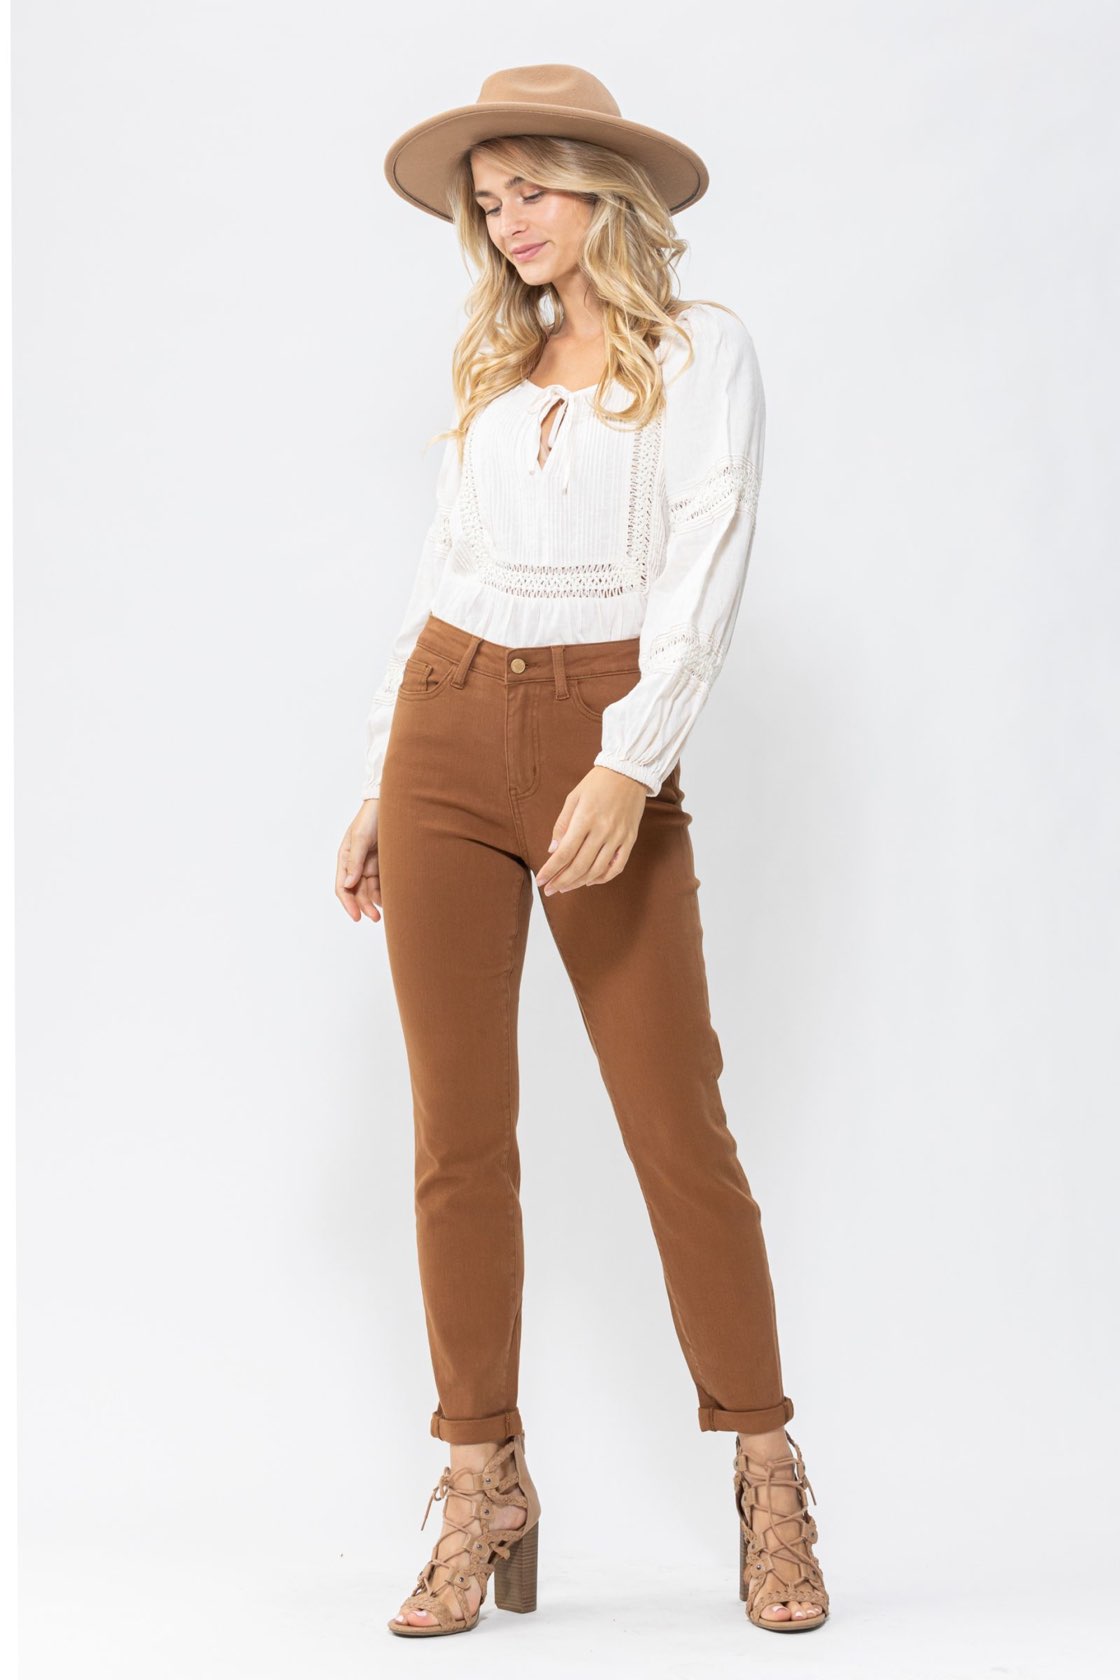 Calling Fall Brown Judy Blue Jeans